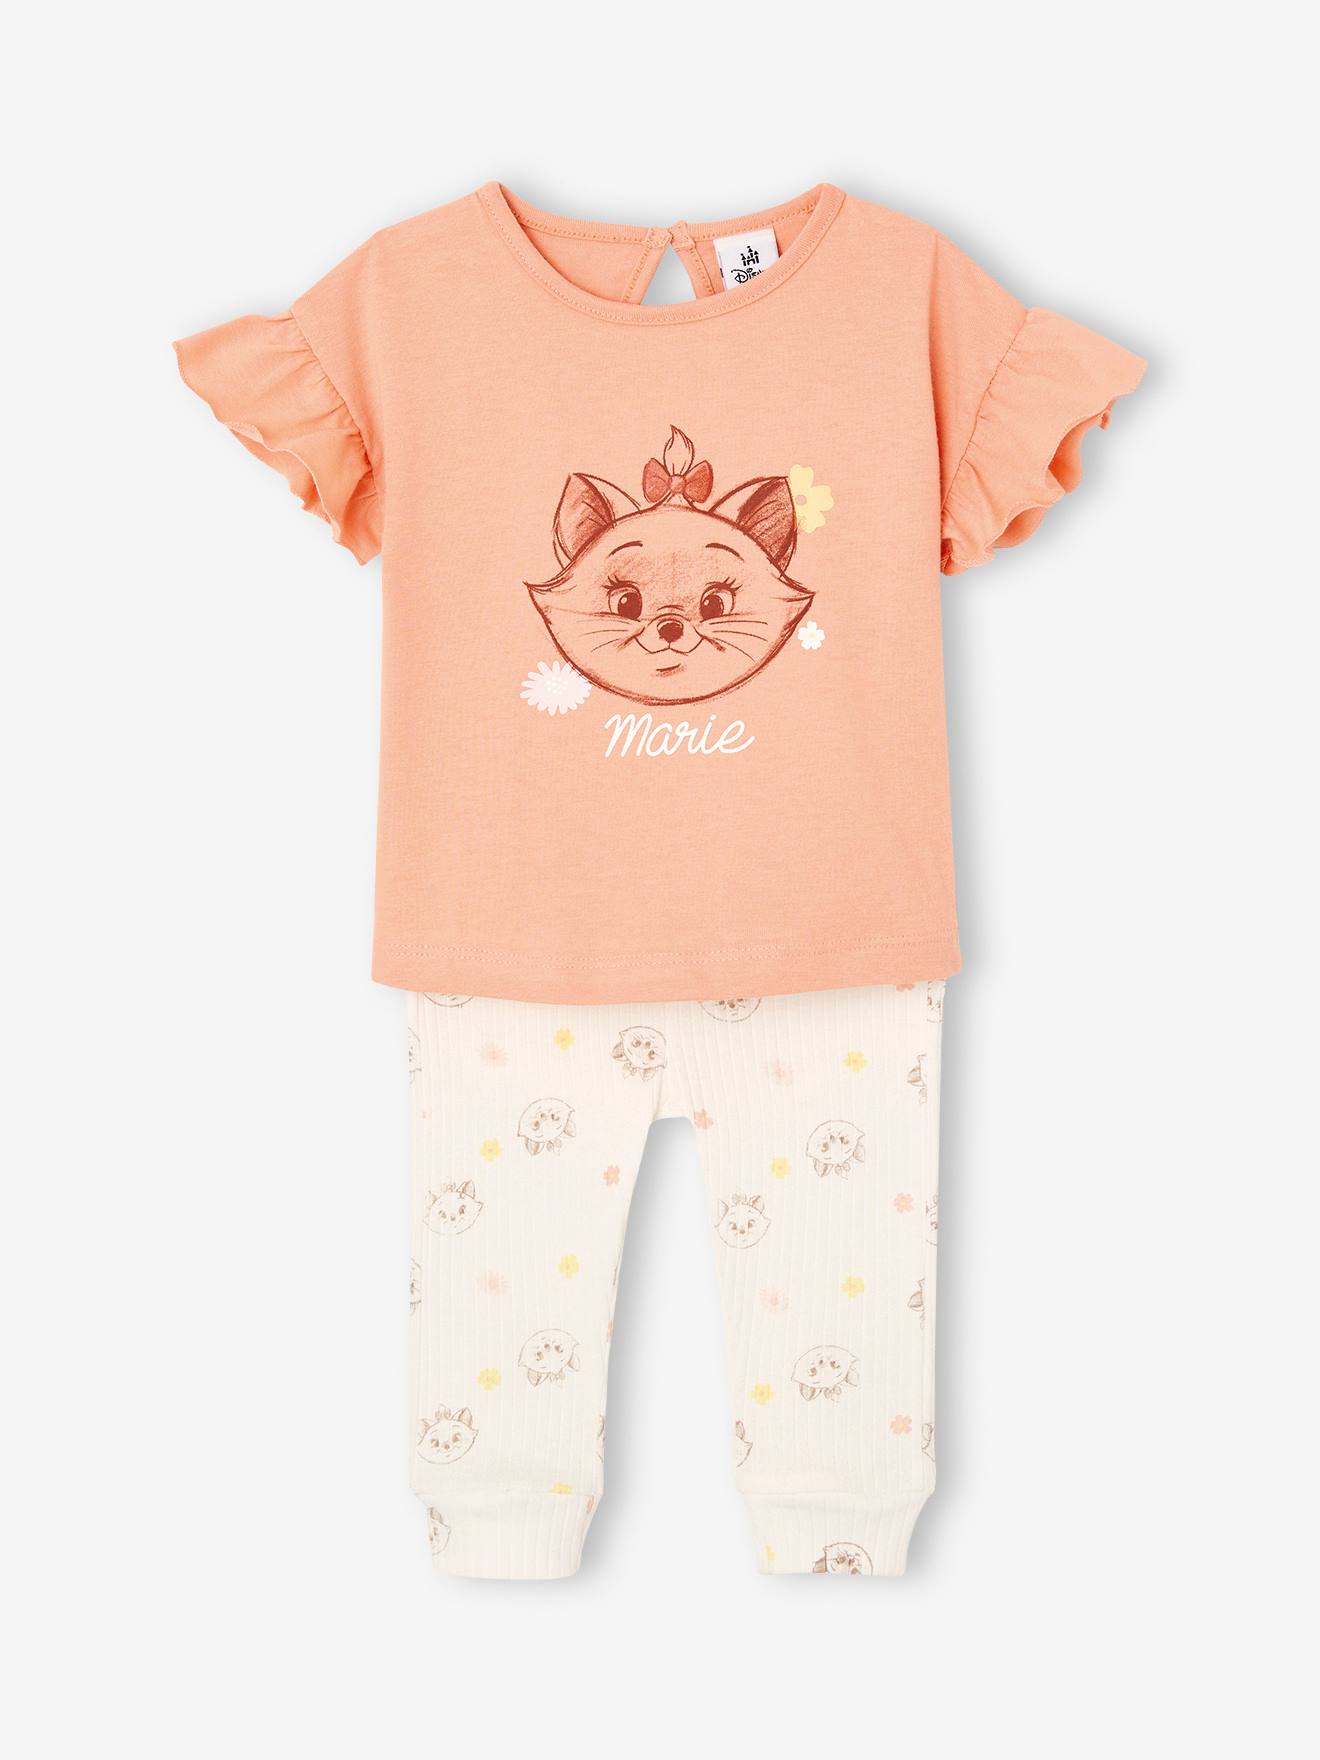 Marie of The Aristocats T-Shirt + Leggings Combo by Disney(r) for Babies apricot